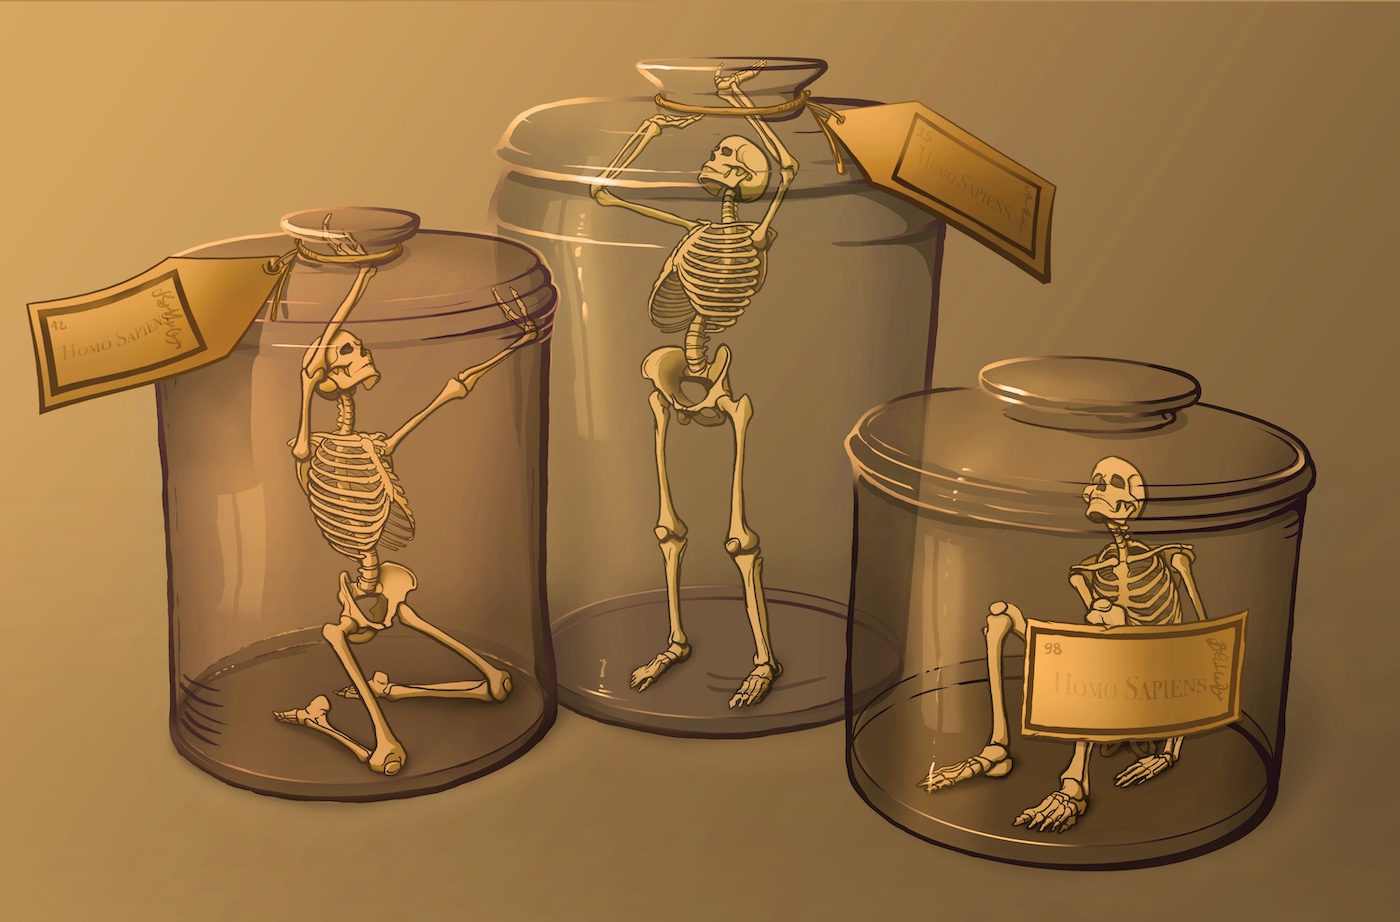 Human skeletons inside glass jars, reaching out trying to free themselves from the inside.